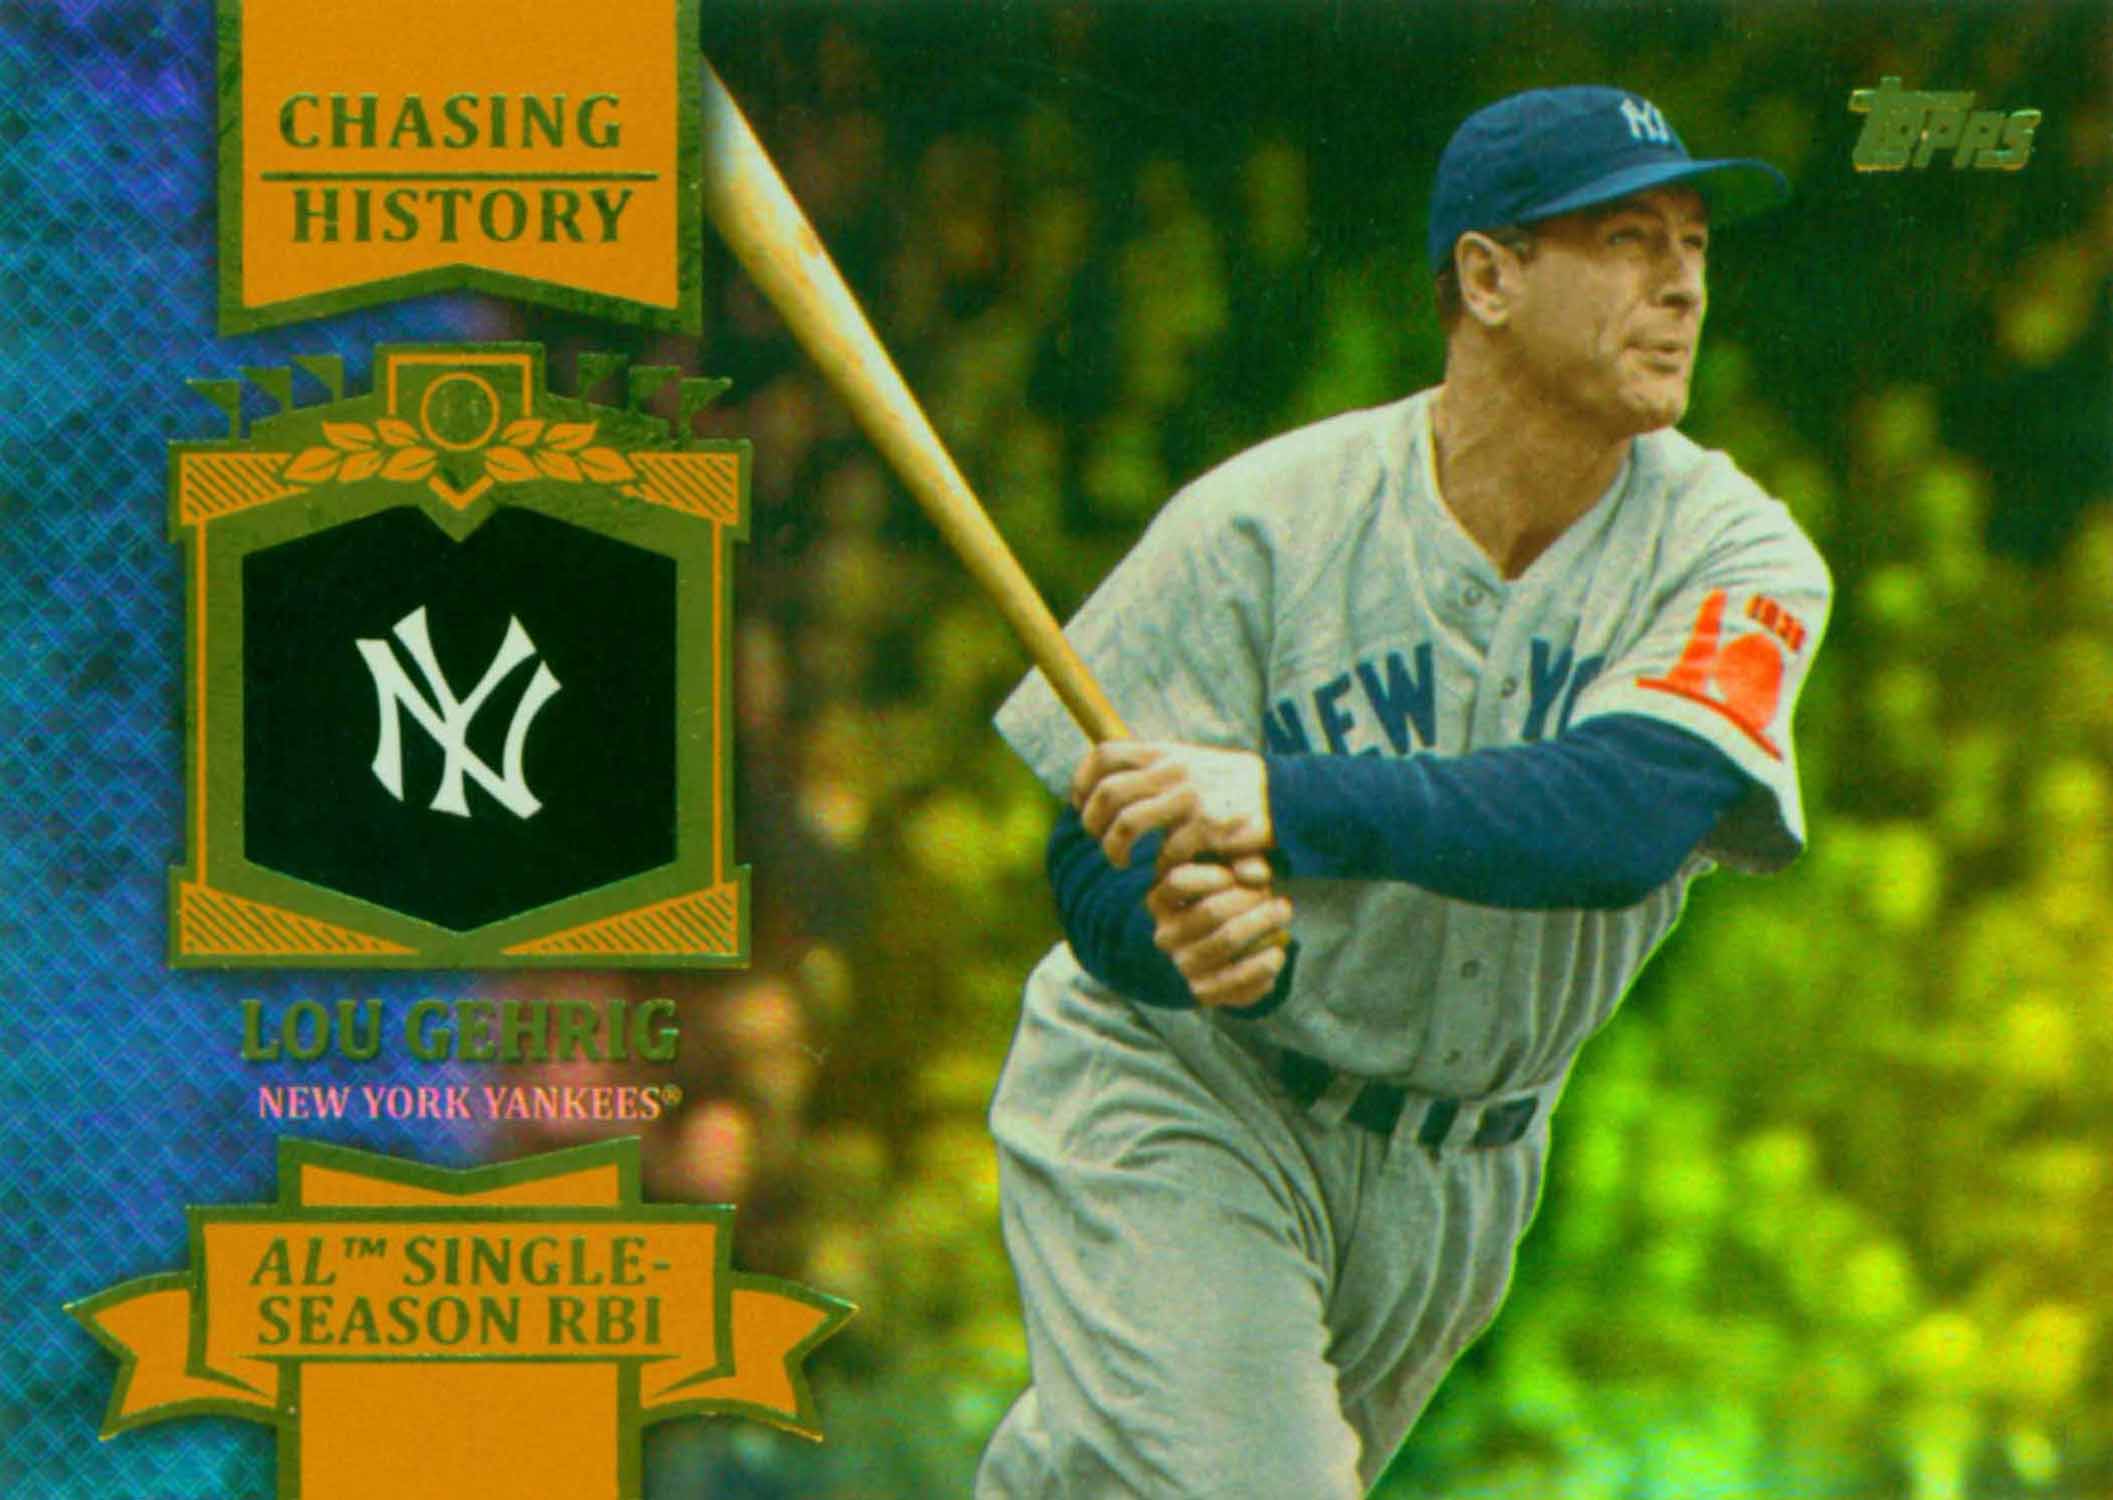 2013 Topps Chasing History Holofoil Gold